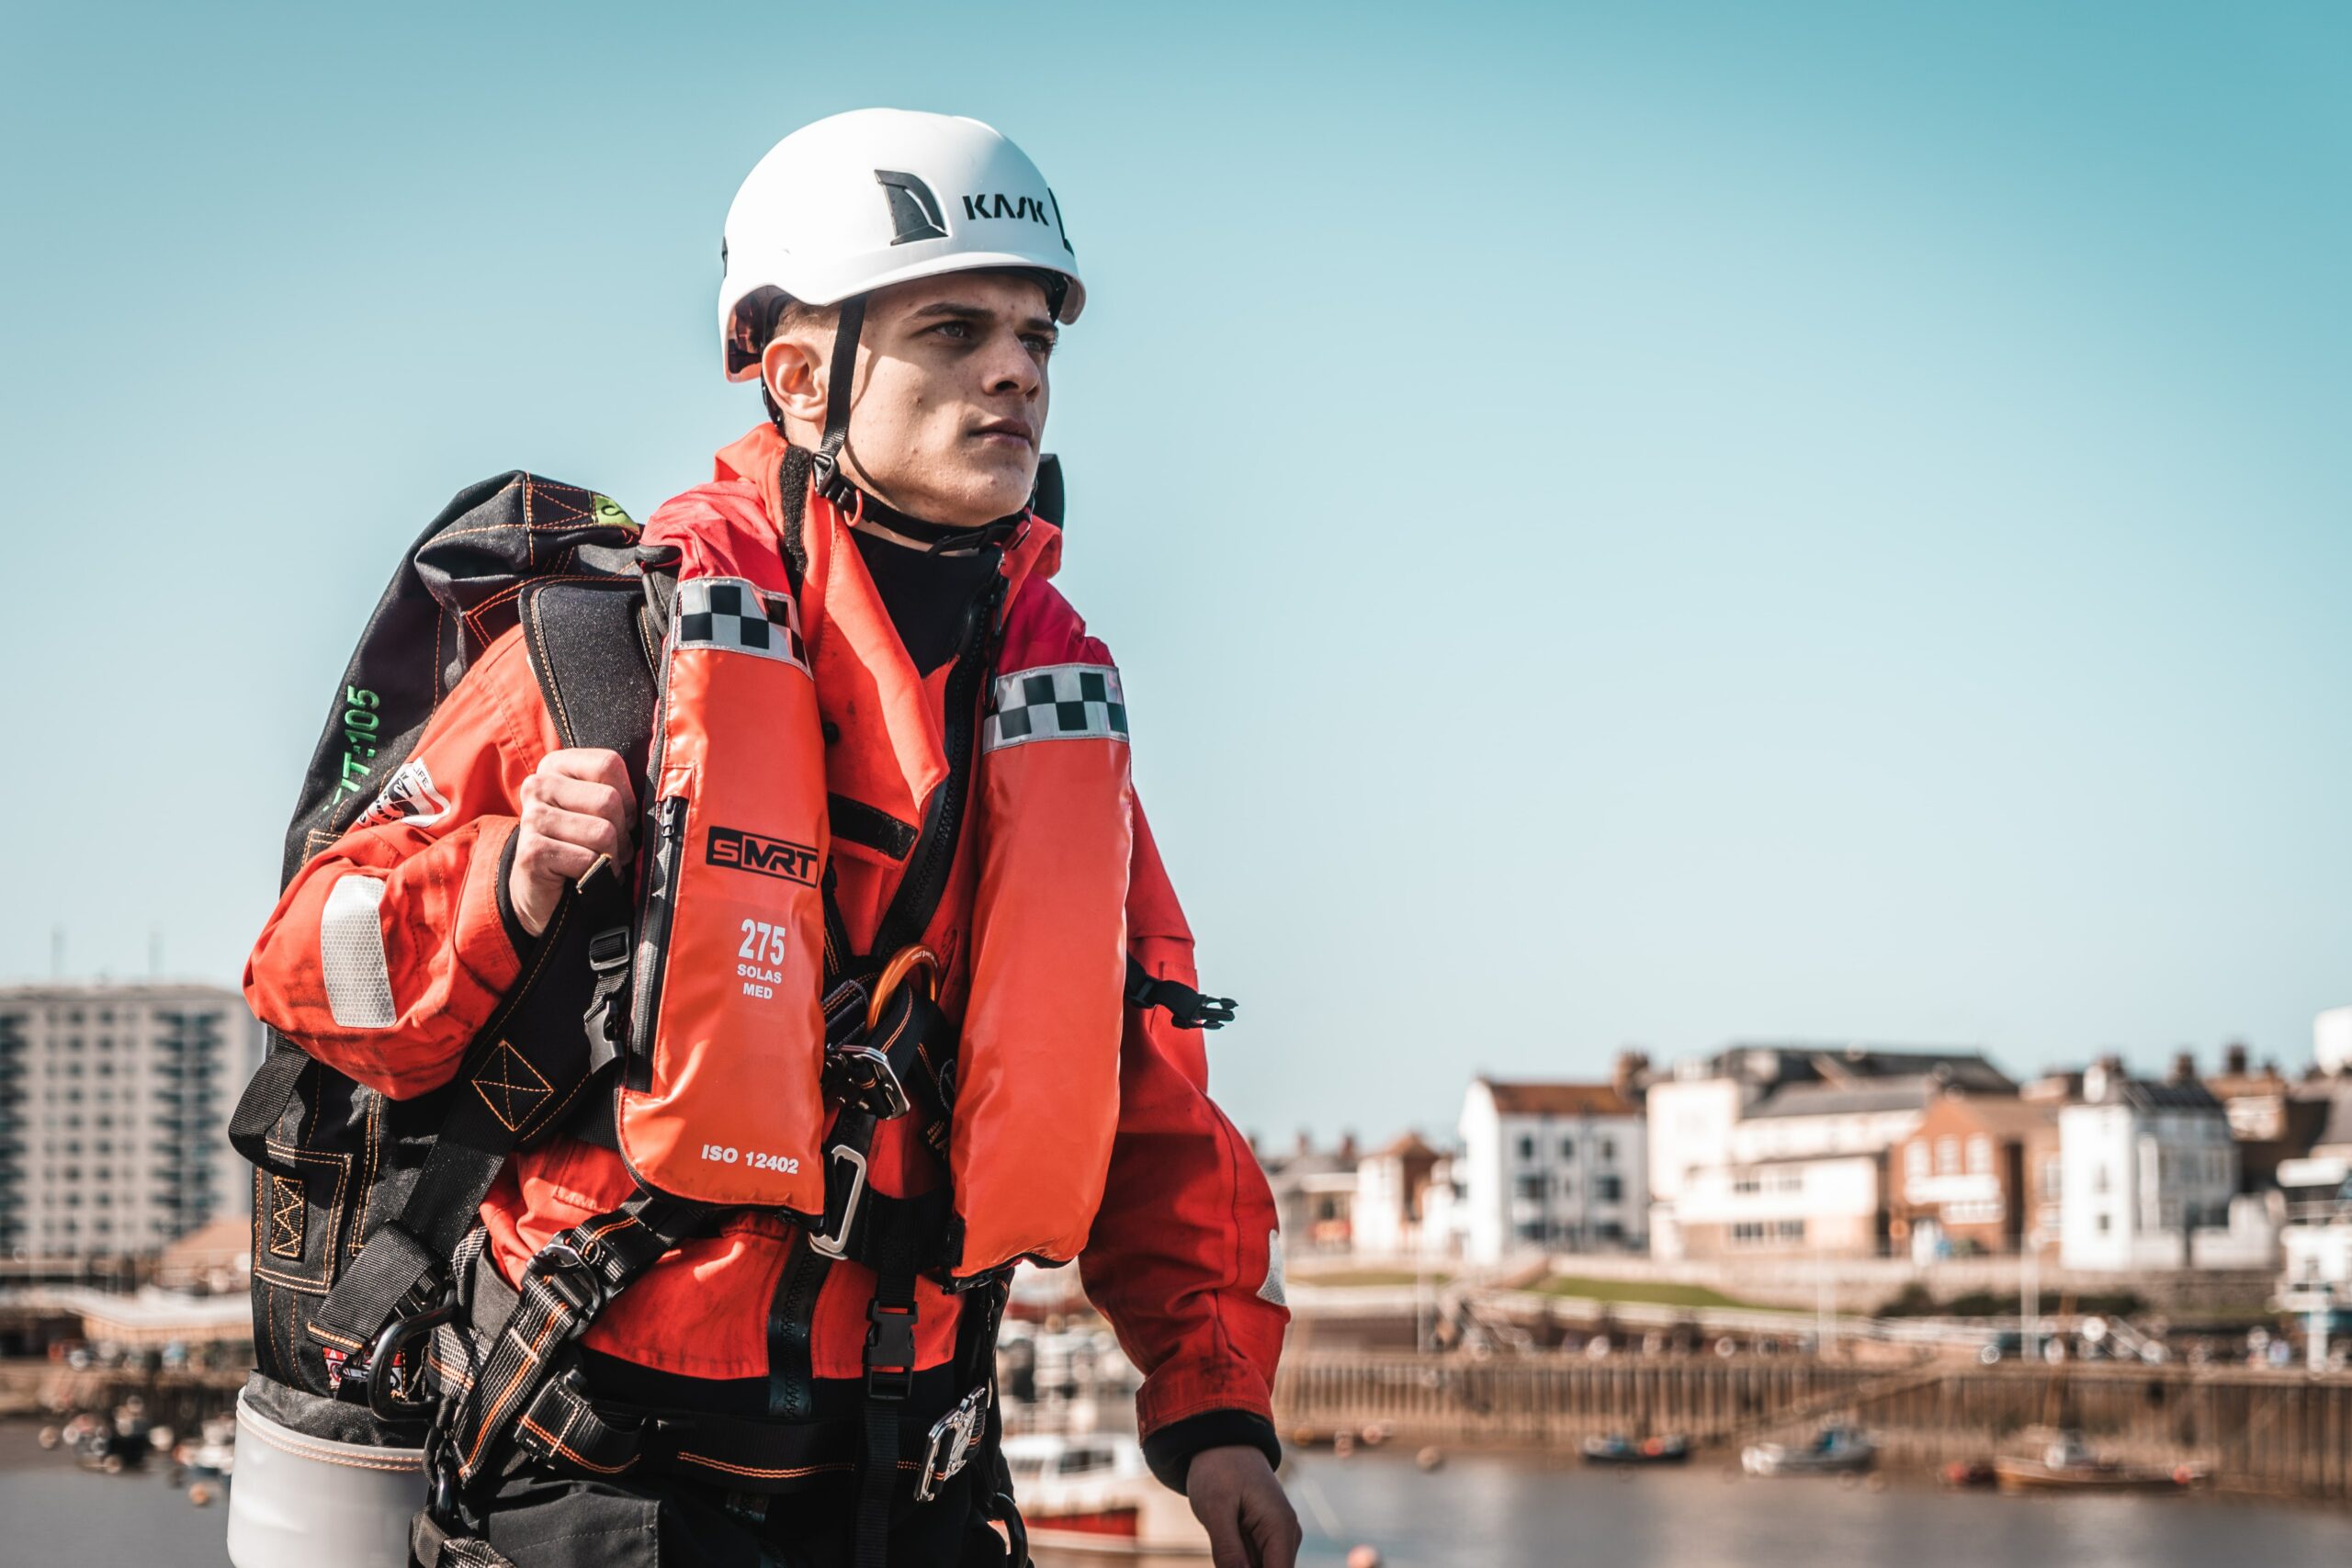 MEMBER NEWS:  Wescom Group make acquisition of Marine Rescue Technologies